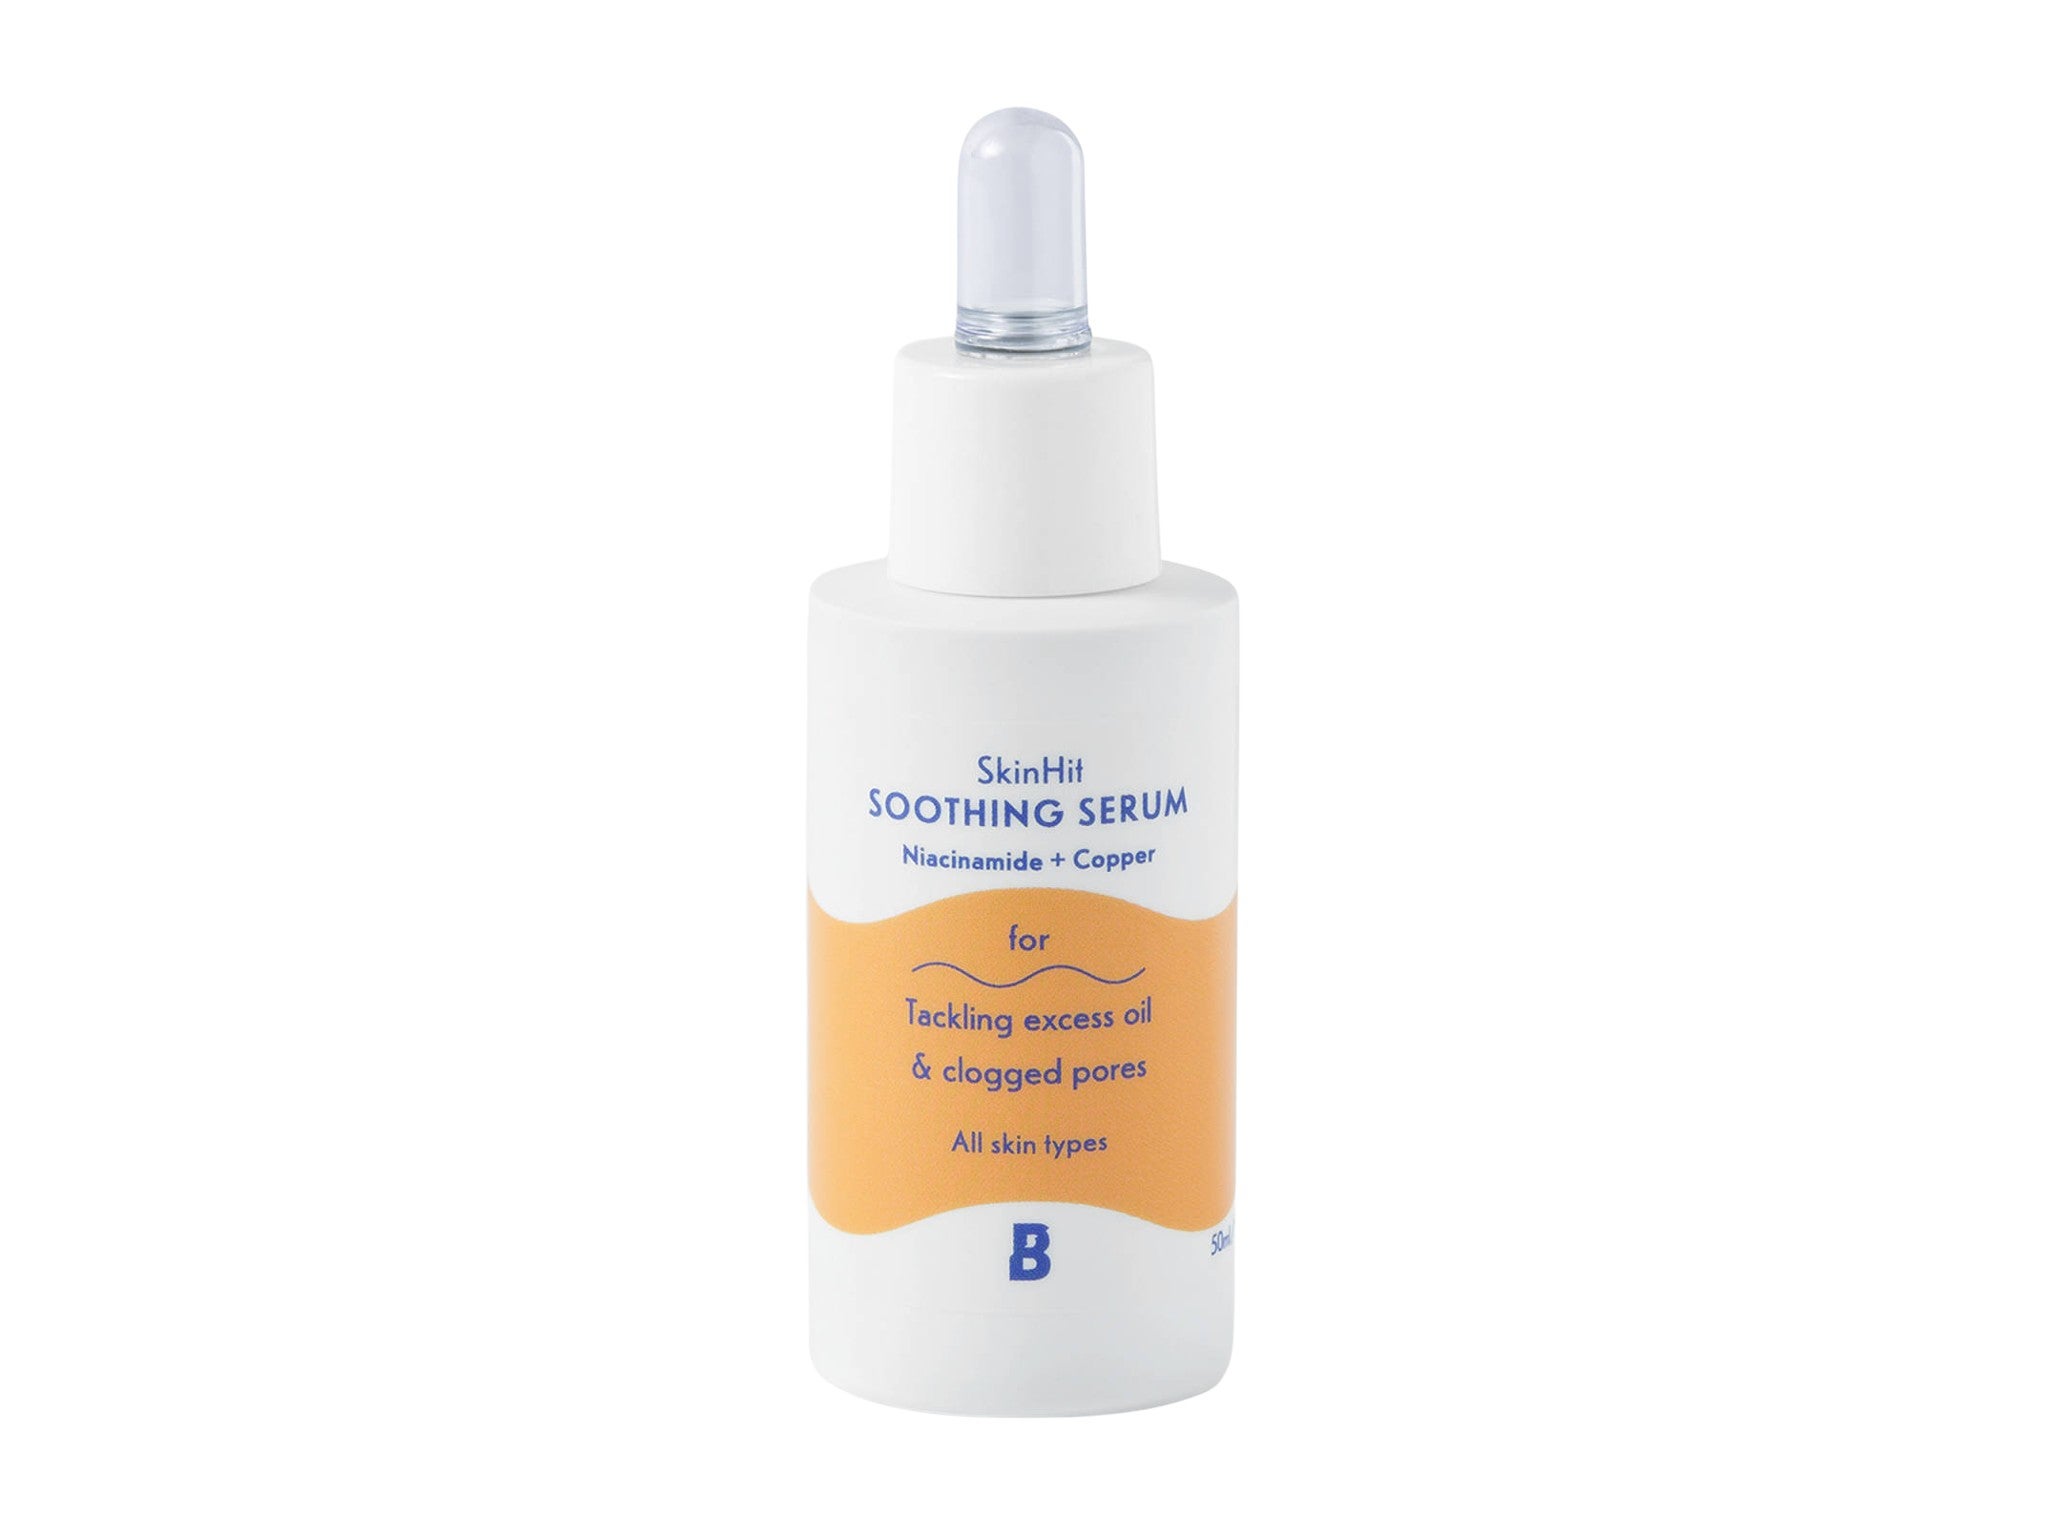 Beauty Bay skinhit soothing serum with niacinamide and copper indybest.jpg